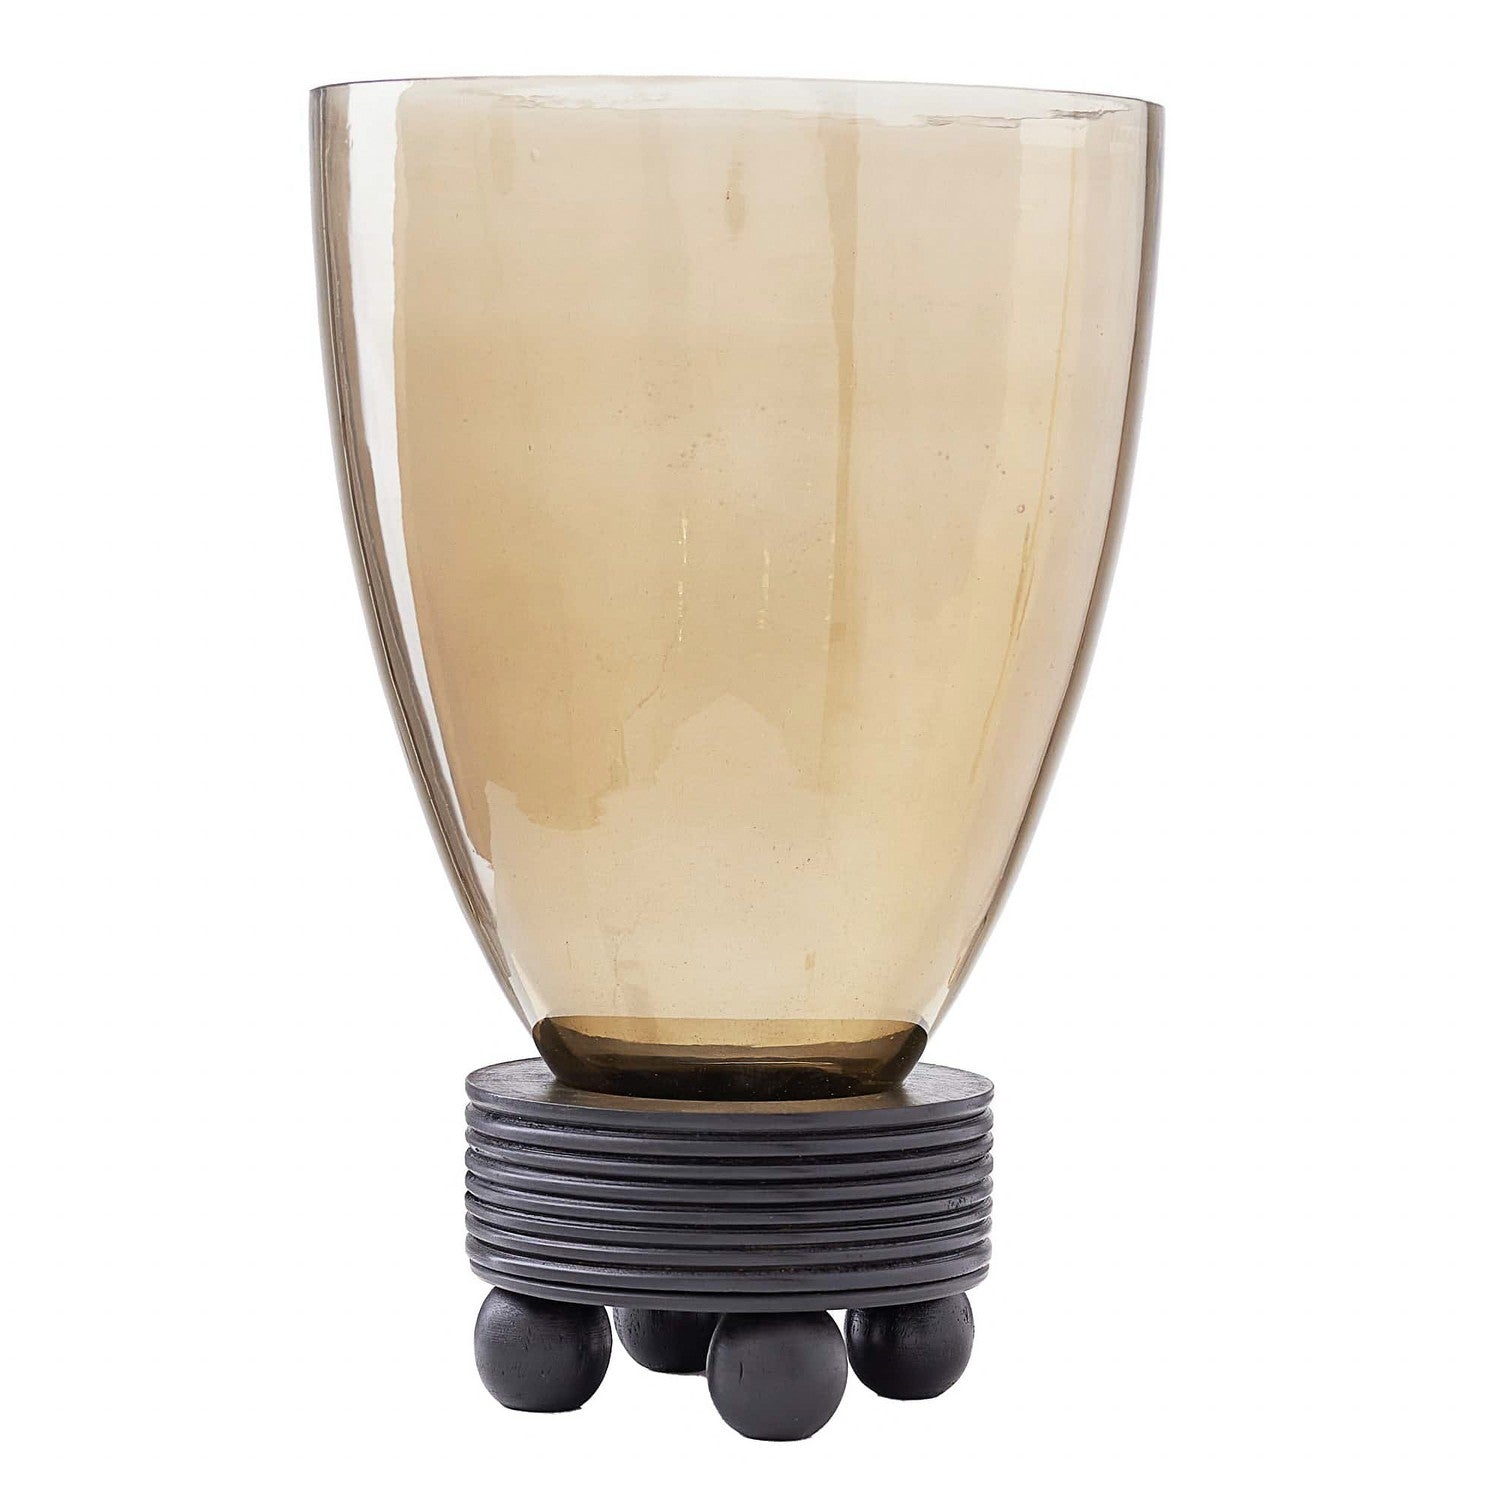 Vase from the Wendell collection in Smoke finish